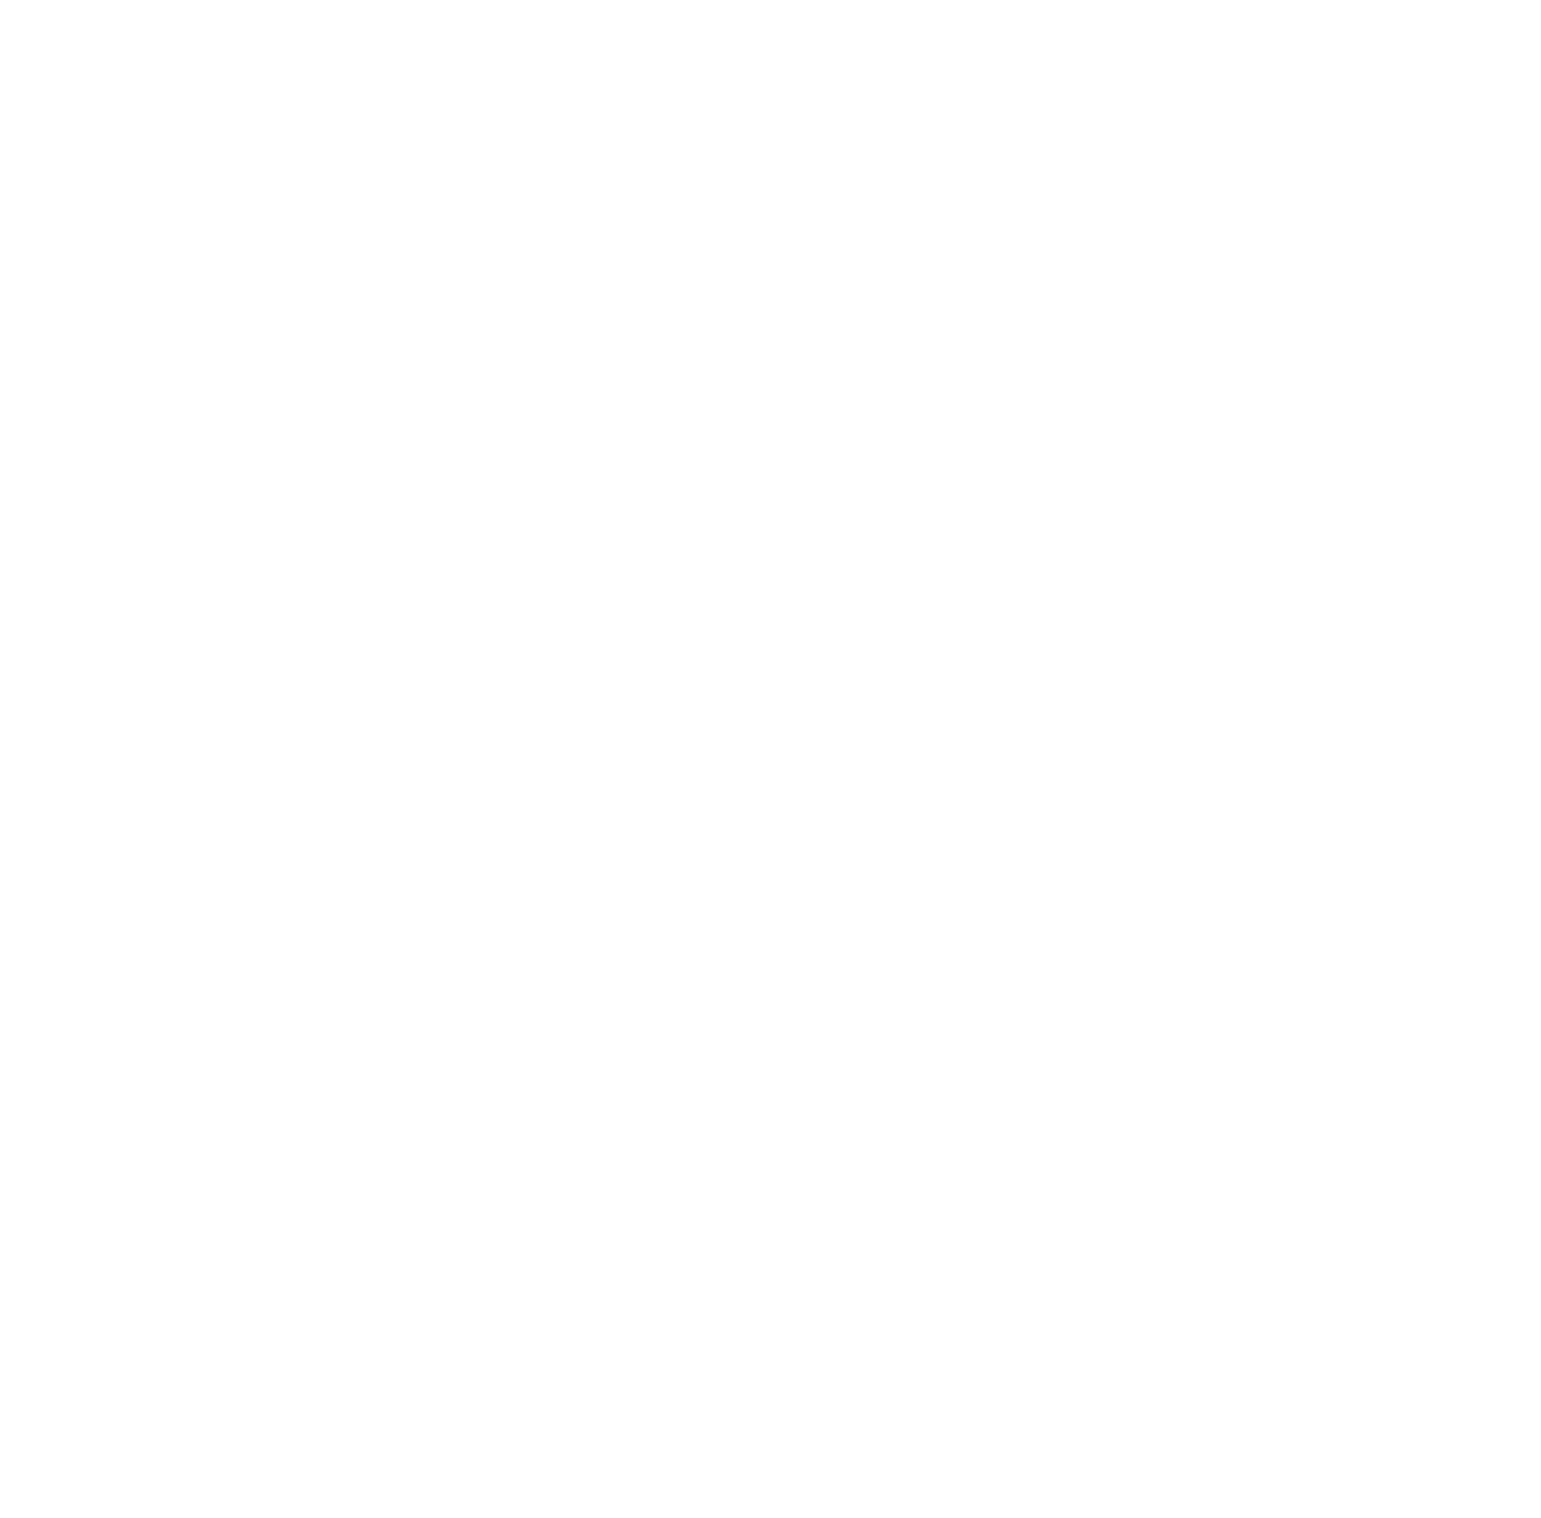 Global Power Synergy logo pour fonds sombres (PNG transparent)